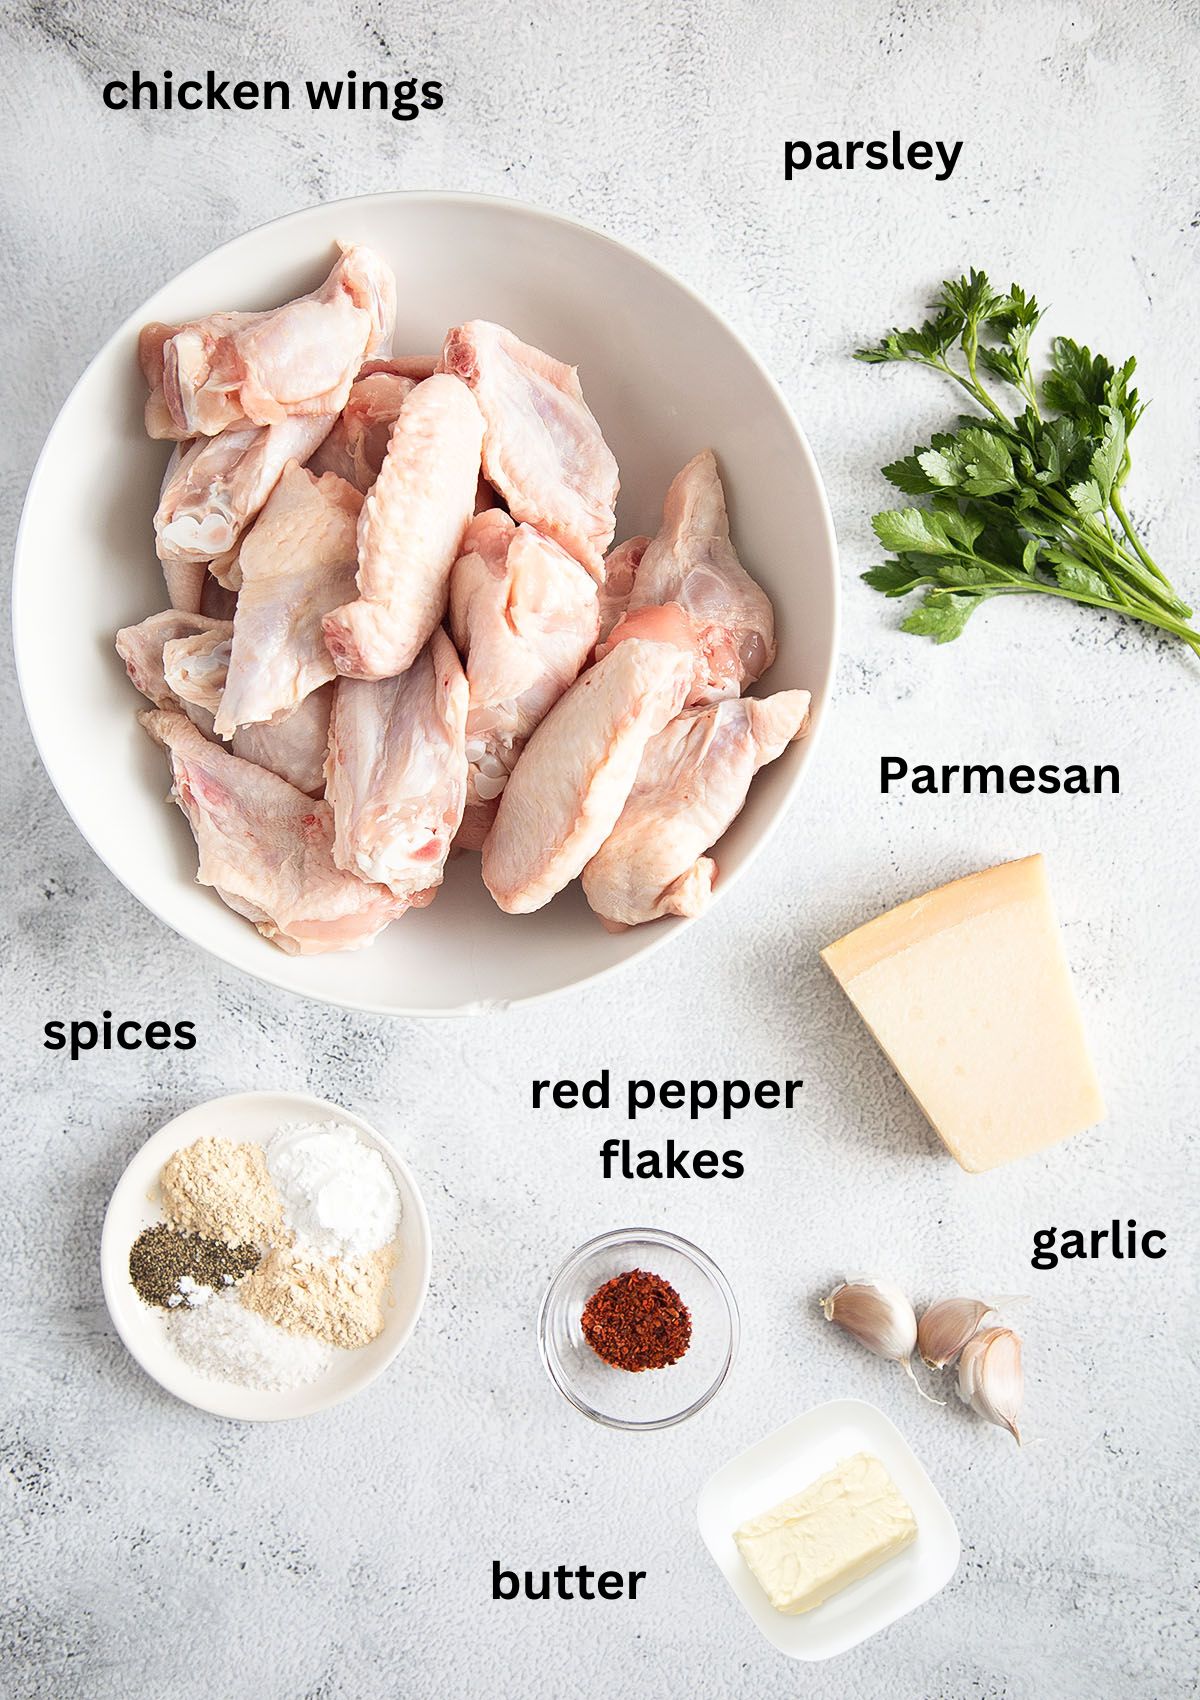 listed ingredients in bowls for making chicken wings with garlic butter and parmesan sauce.